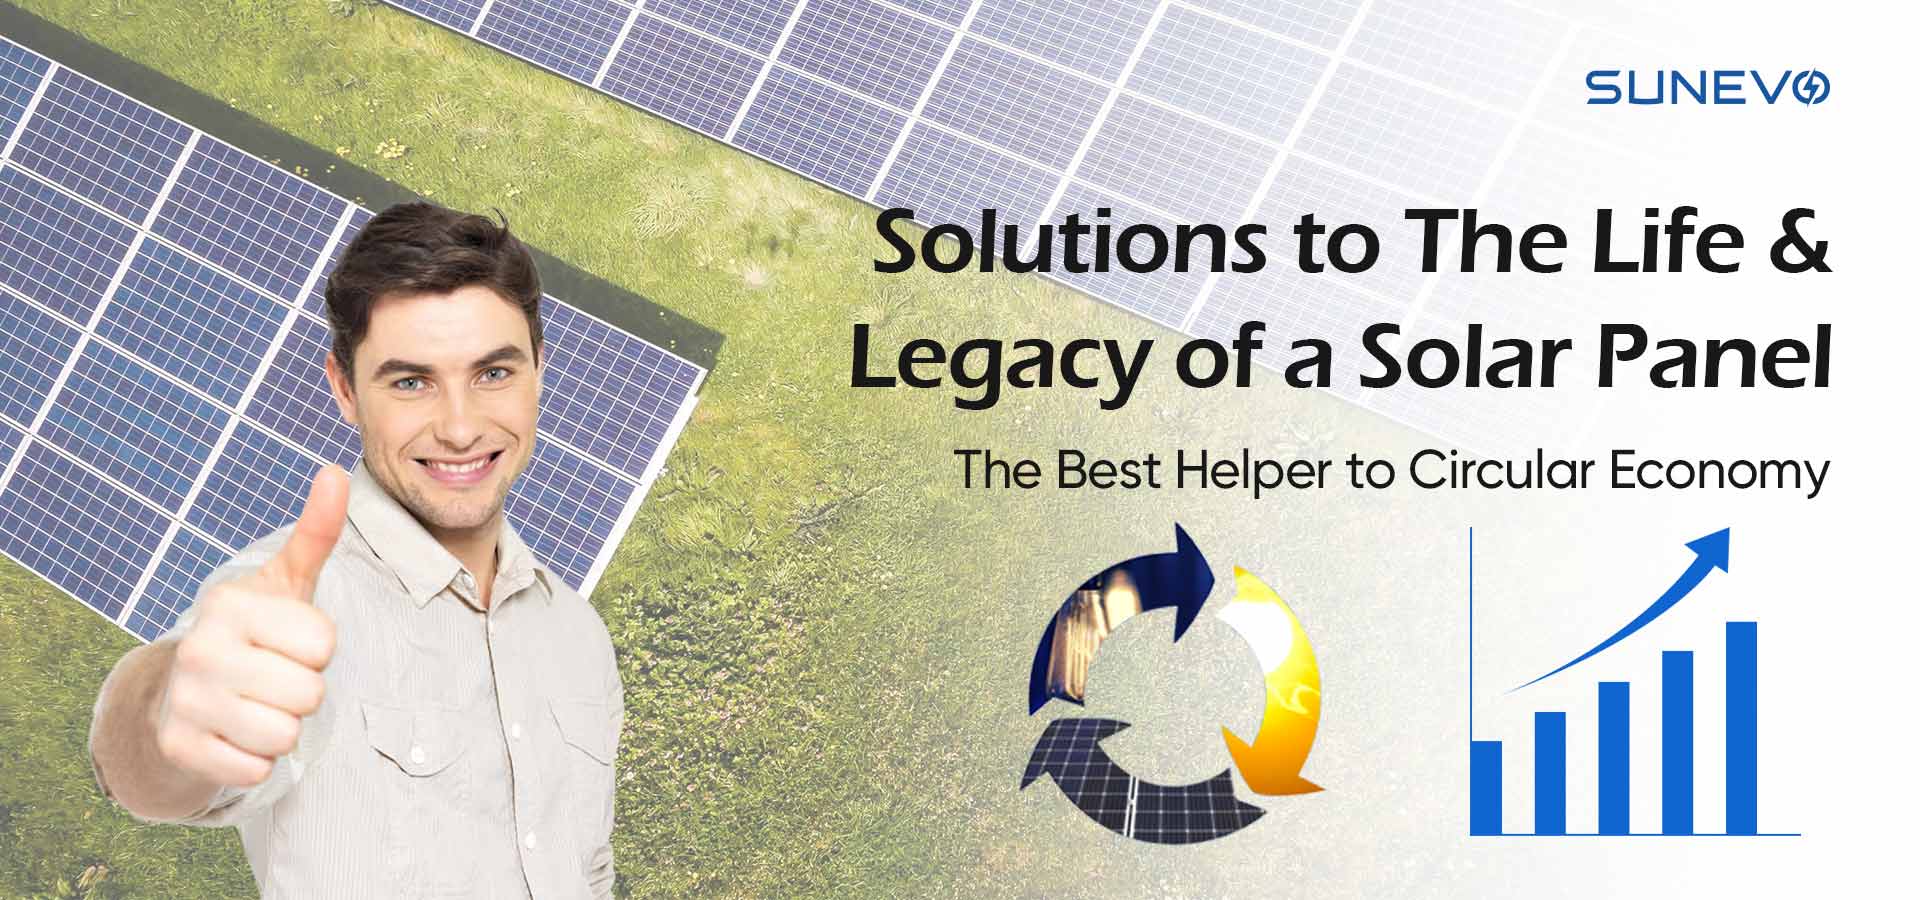 Life & Legacy of a Solar Panel: Circular Economy Solutions